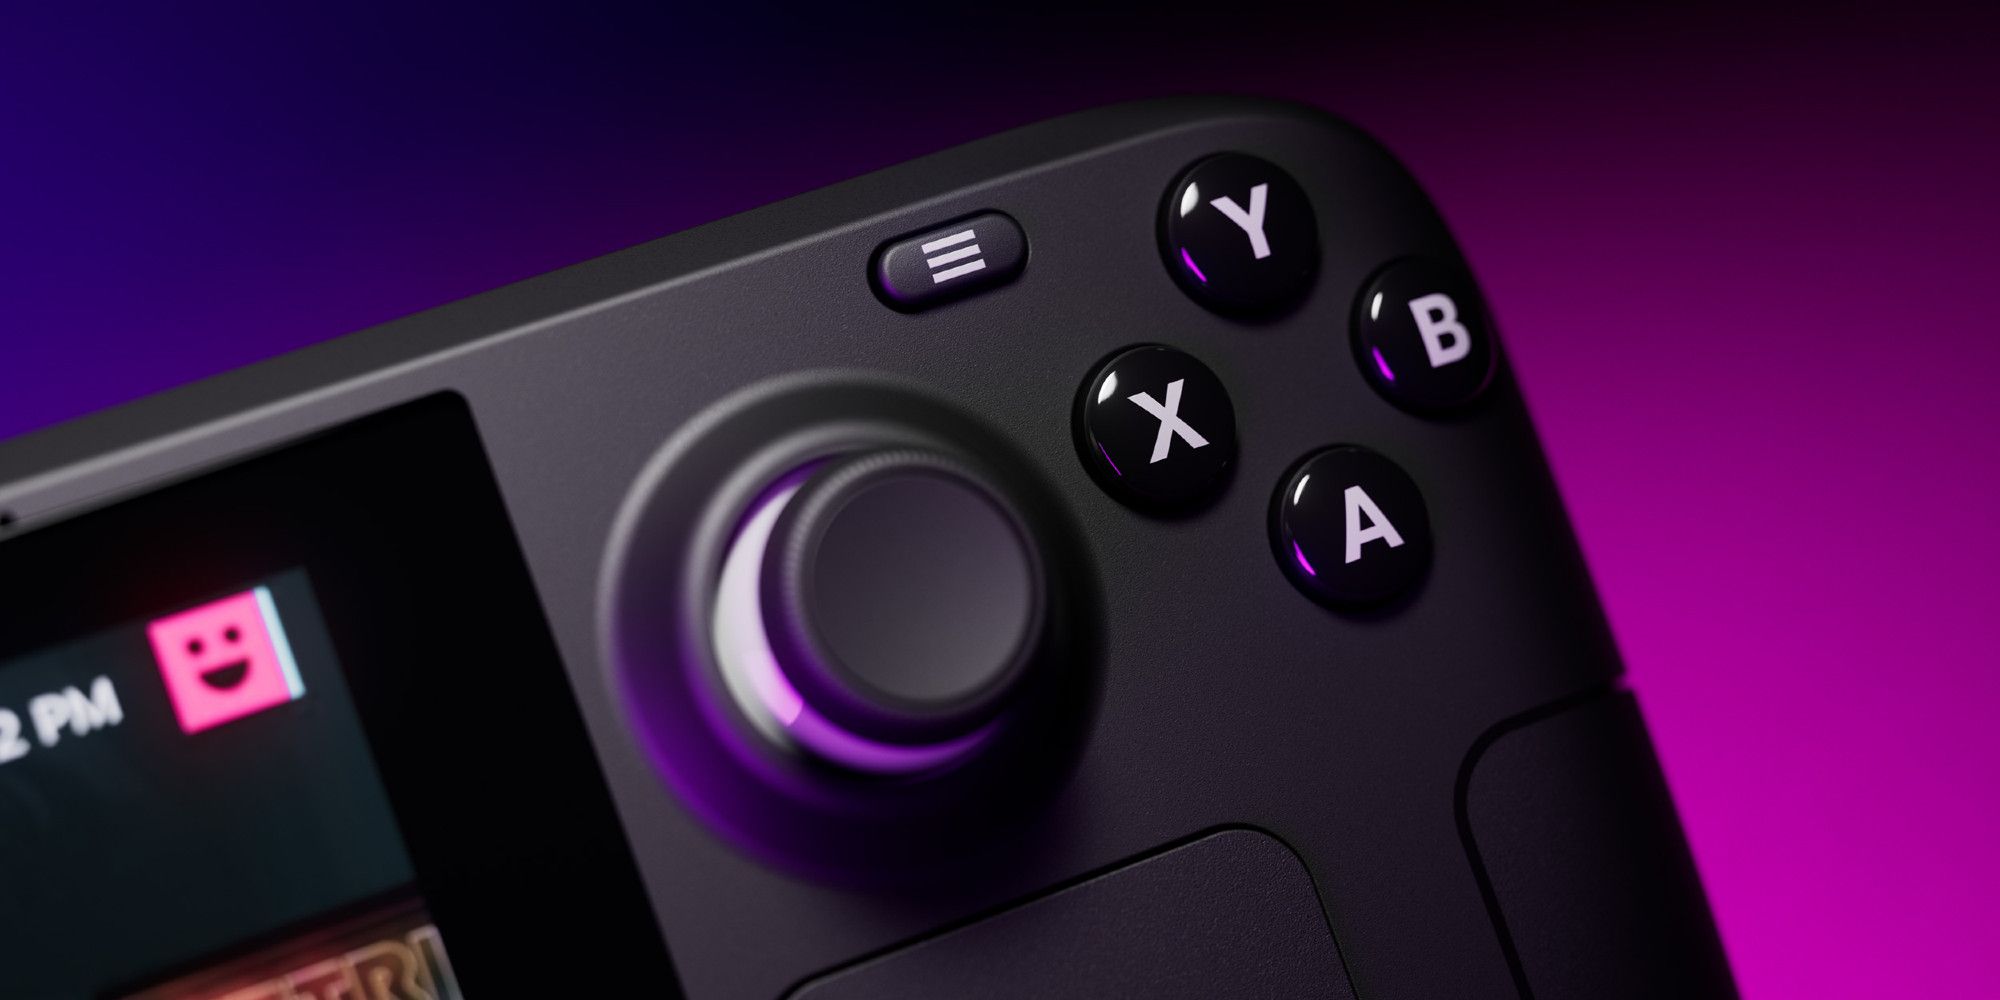 A render of the Steam Deck controller